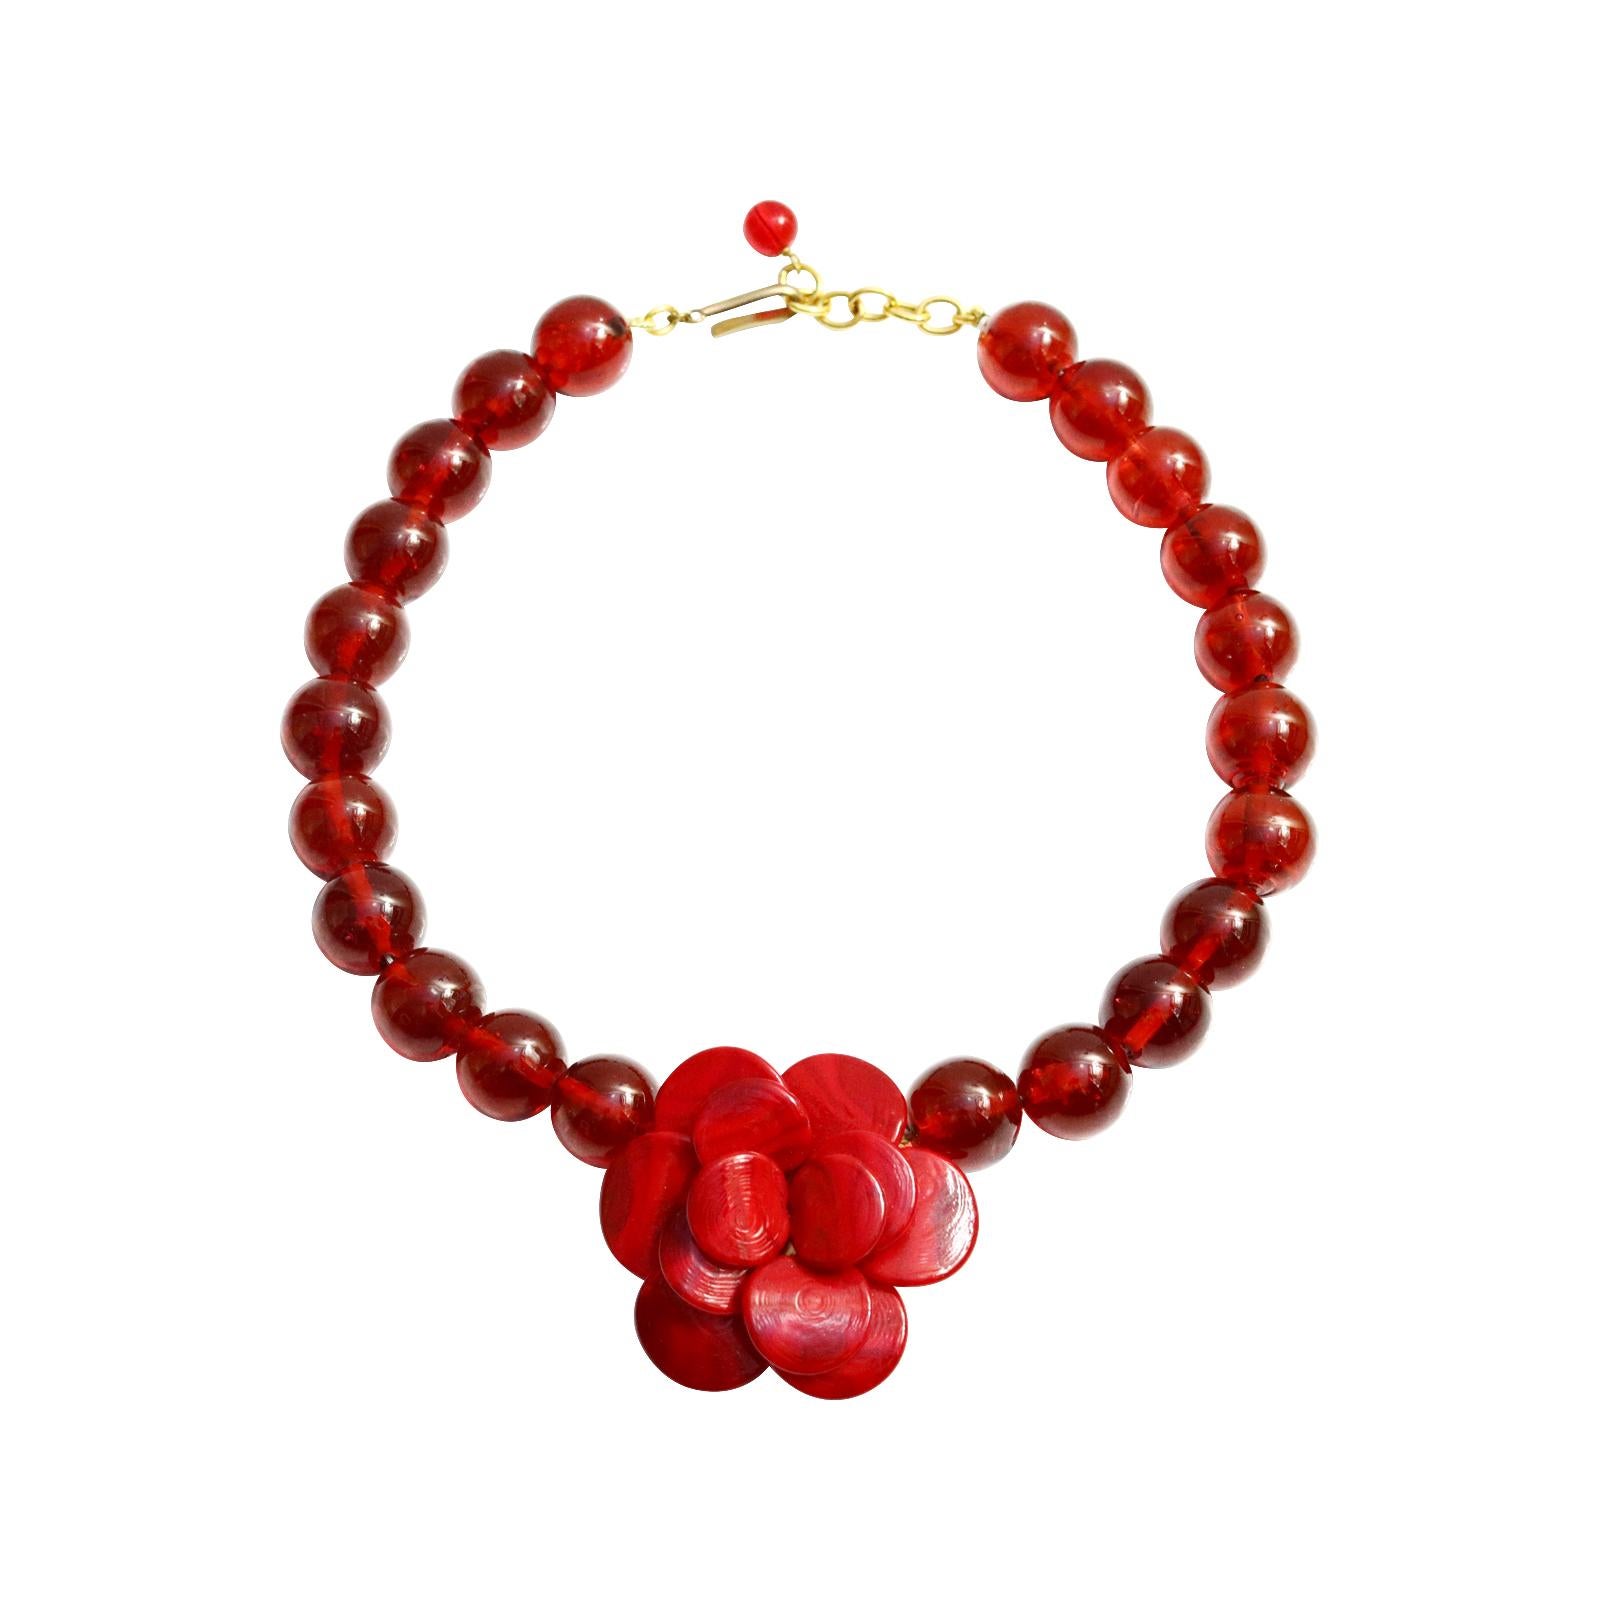 Vintage Gripoix Red MDV Paris Flower Necklace. This necklace is so spectacular.  The flower is like the Chanel Camelia. This just oozes class.  Something about this is just so special once it is on.  May not have much curb appeal but it come alive